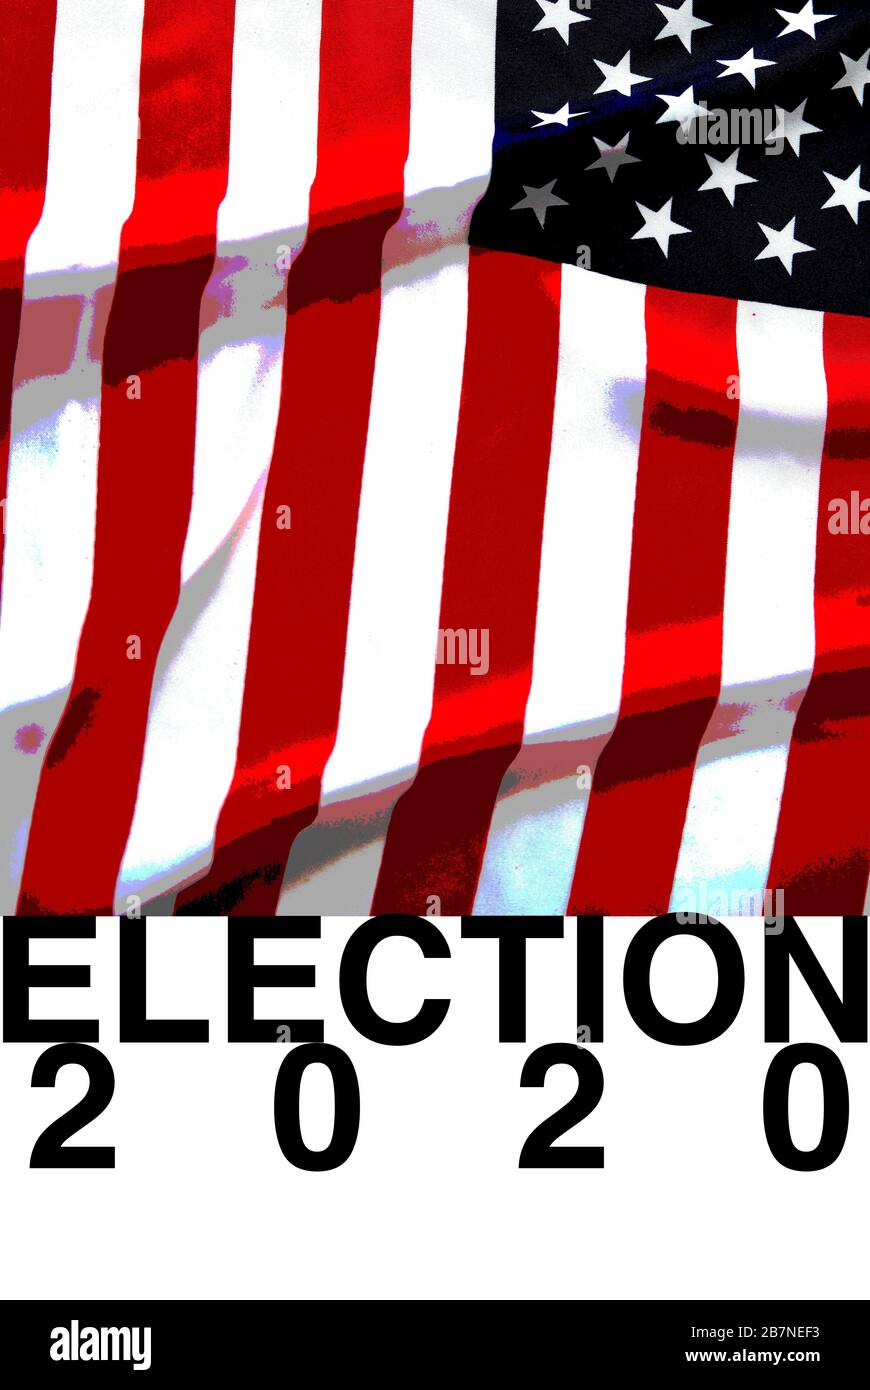 Election word in all caps with 2020 and stylized USA flag Stock Photo